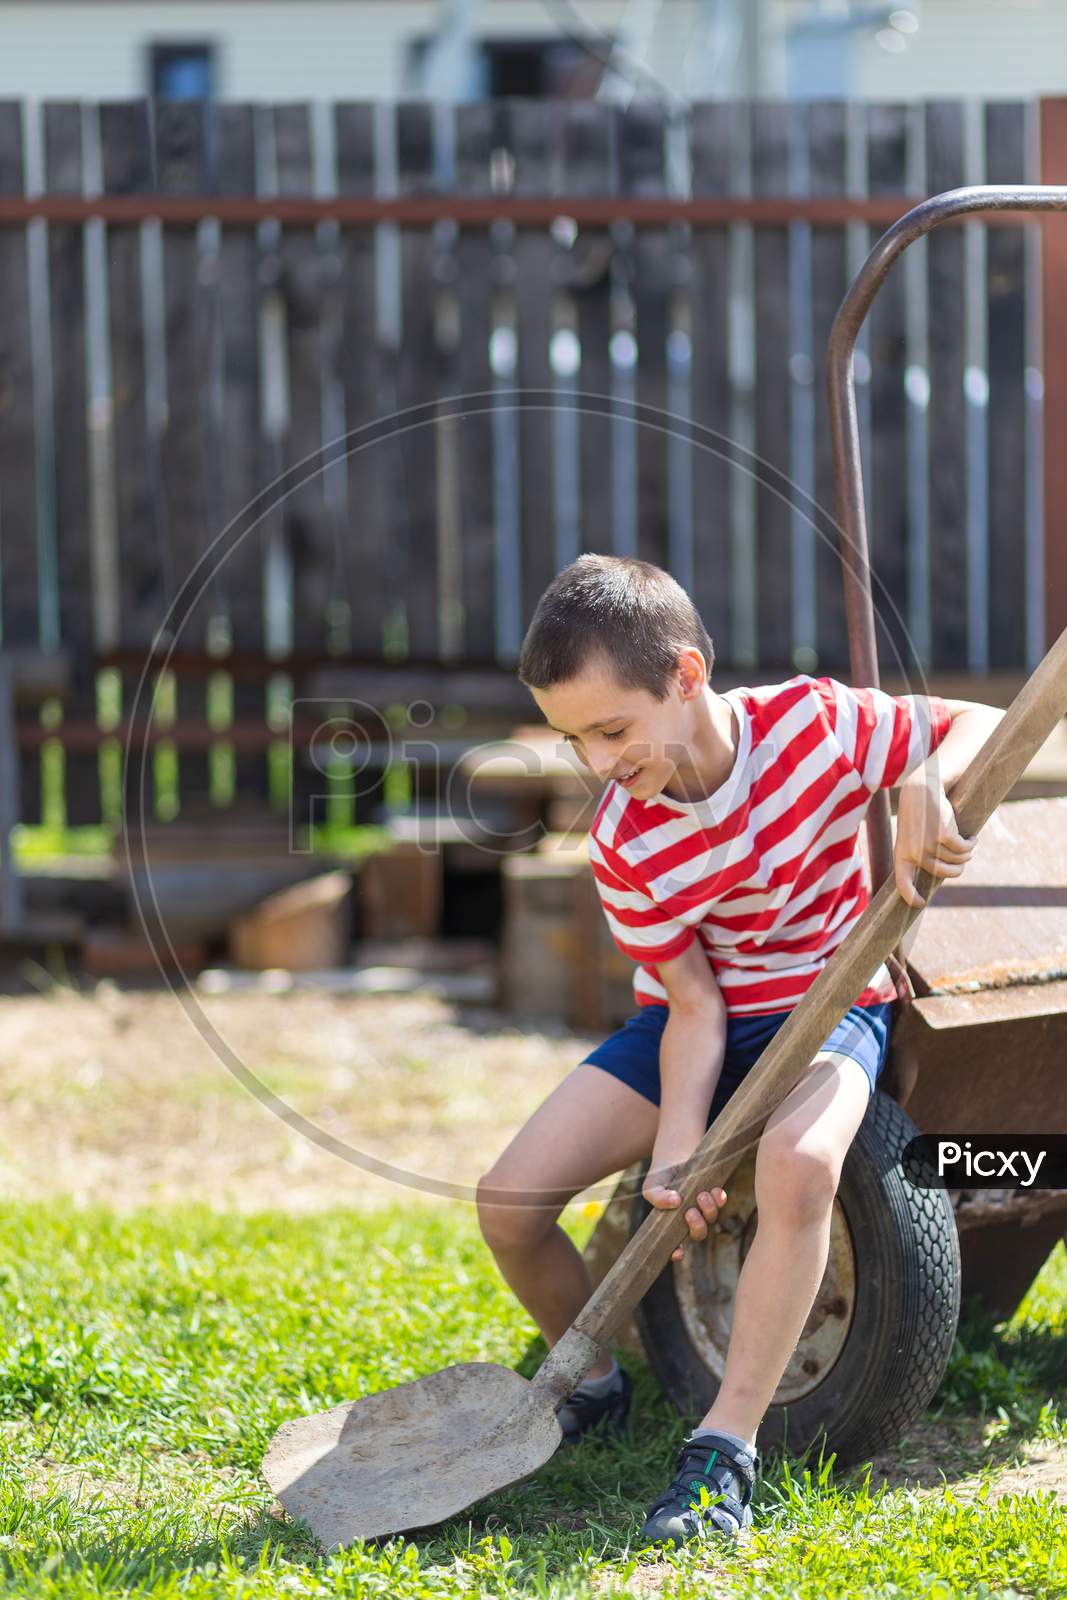 A Little Cheerful Boy Sits On A Garden Wheelbarrow And Holds A Shovel In His Hand In The Garden Of A Country House. Little Boy Helper Ready To Dig